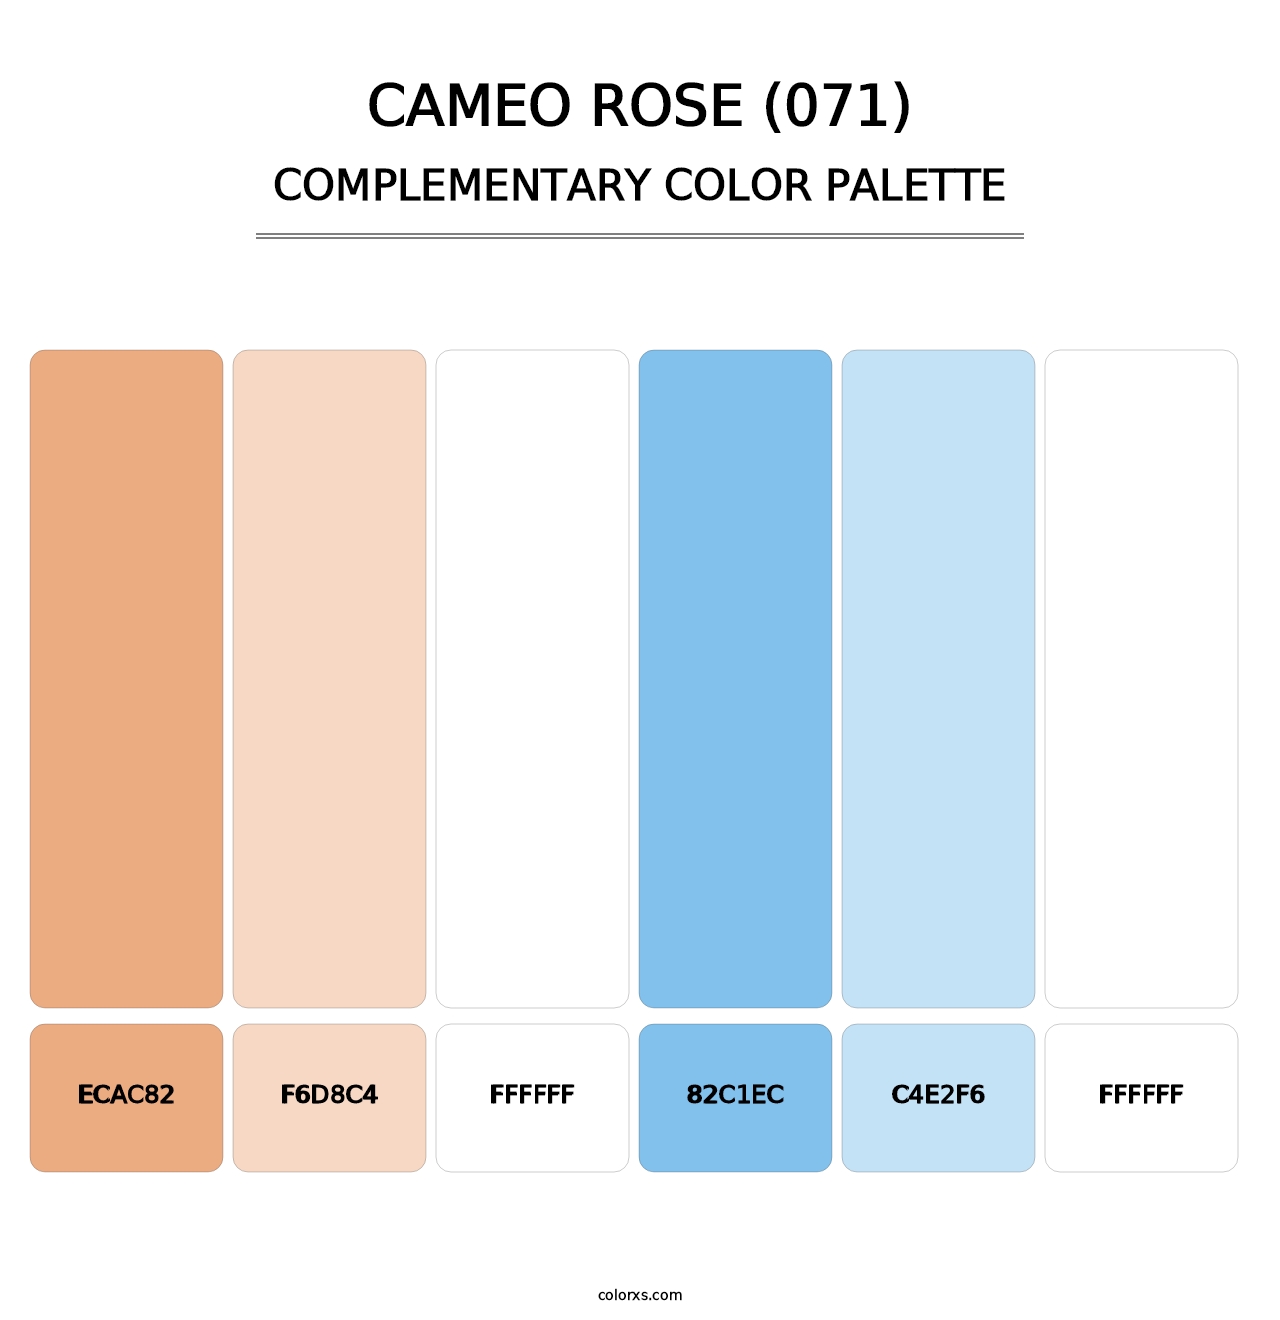 Cameo Rose (071) - Complementary Color Palette